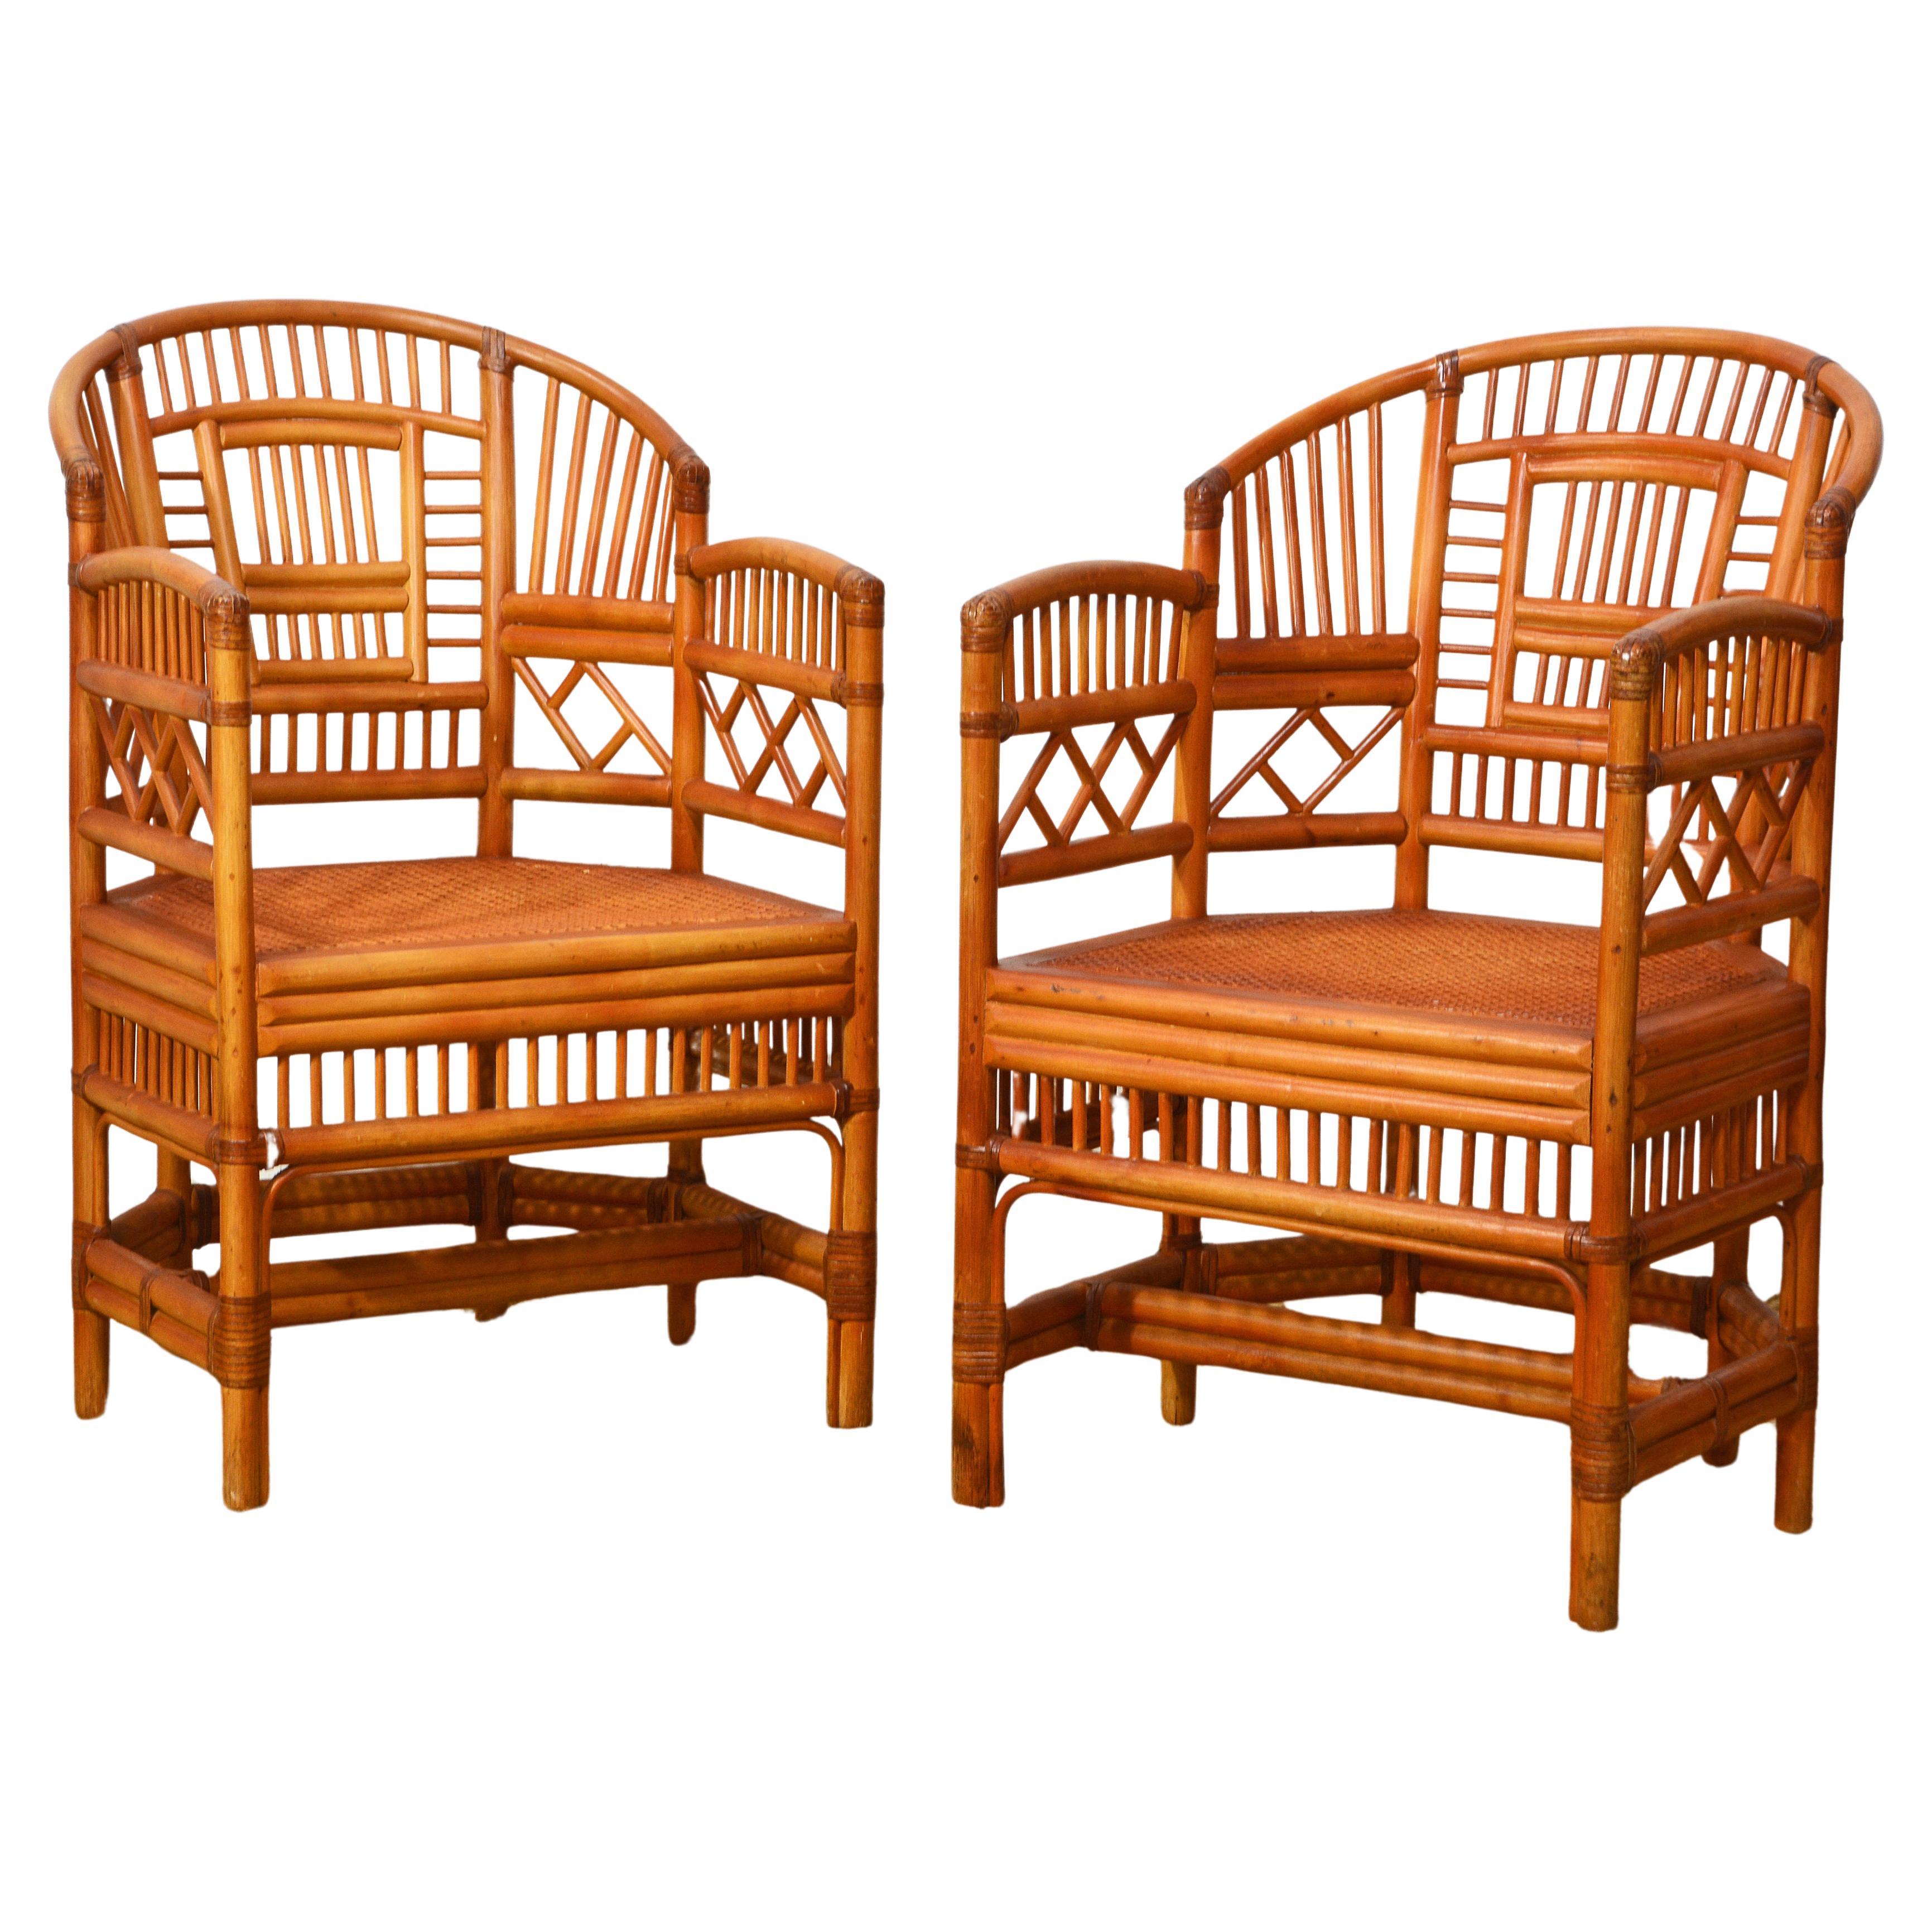 Pair of Brighton Pavillion Style Chinoiserie Rattan and Cane Armchairs